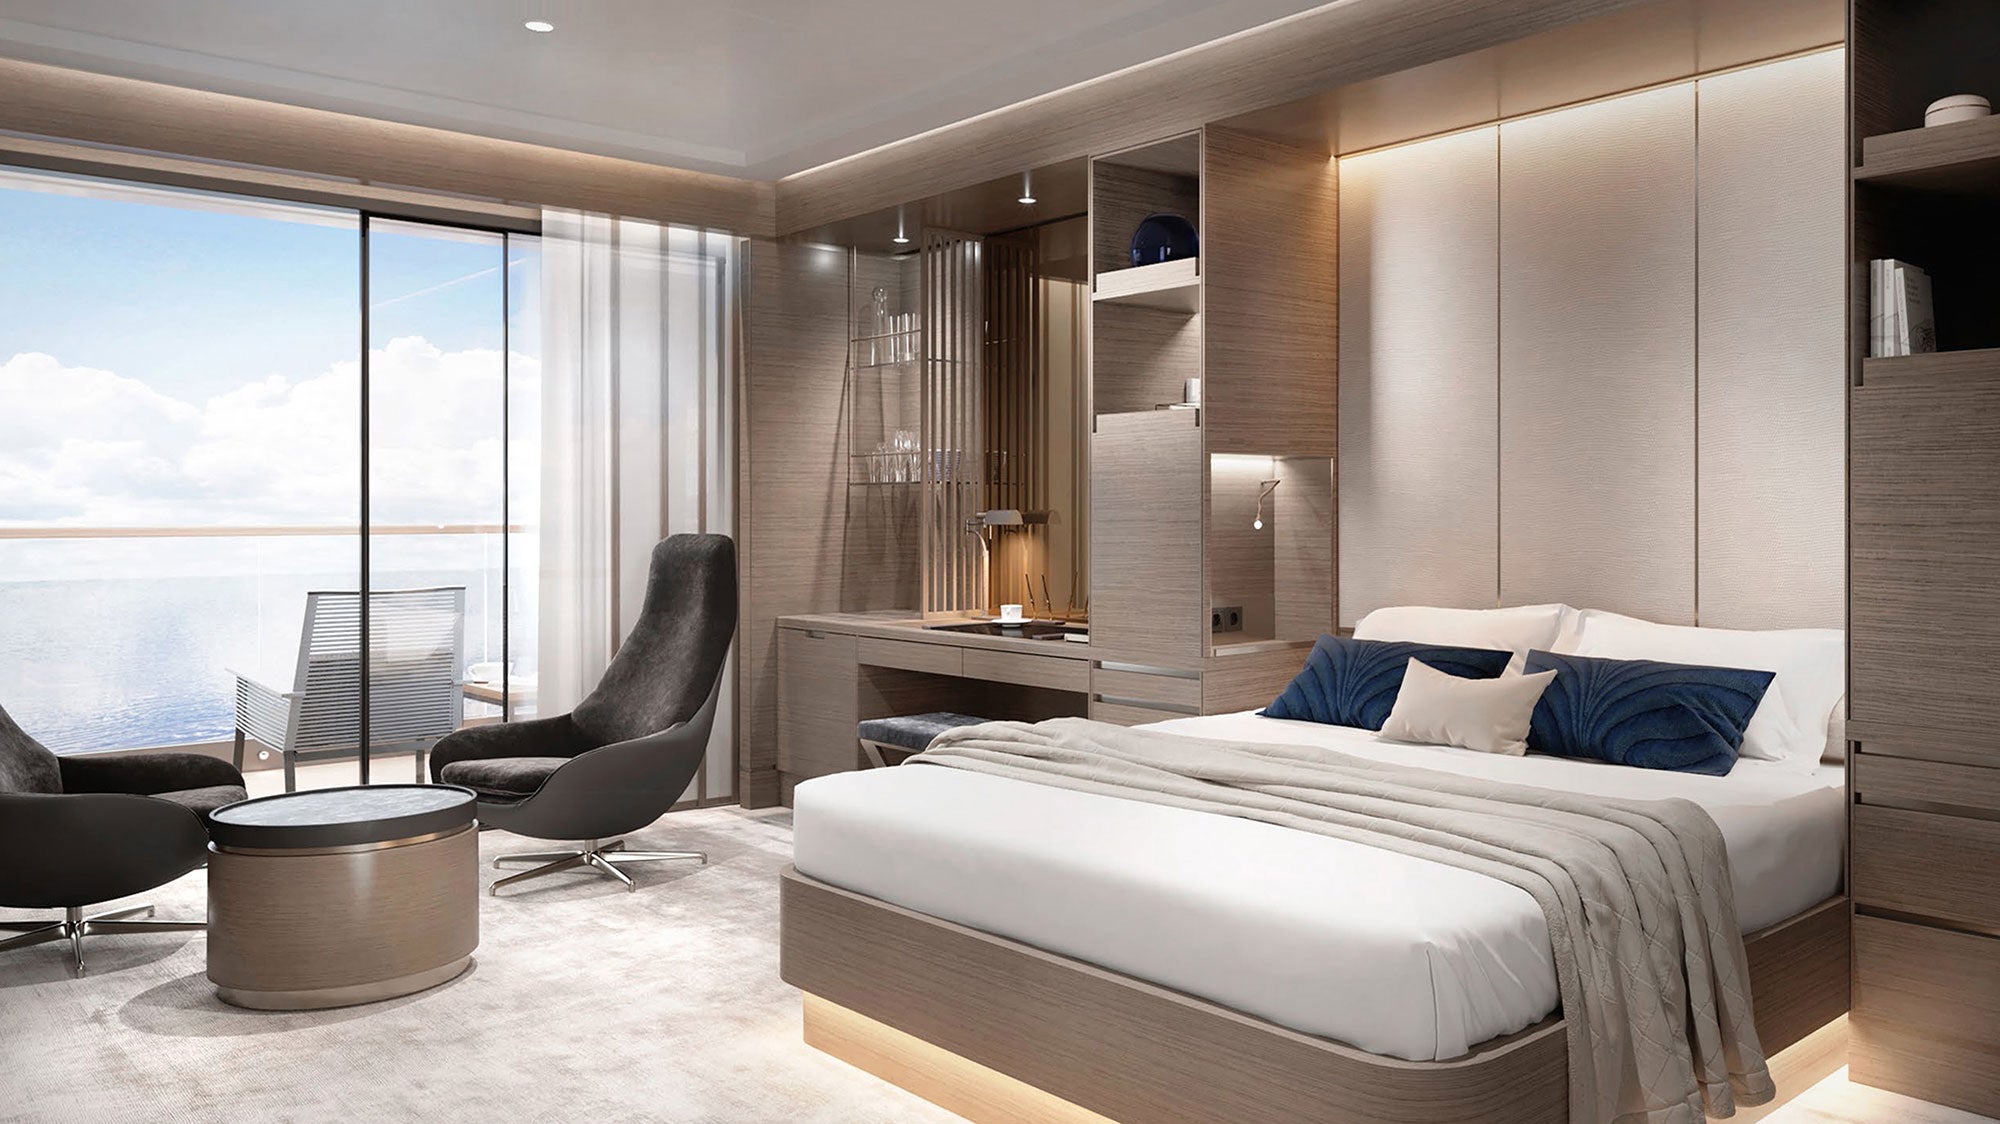 Featured image by Ritz-Carlton Yacht Collection Evrima cabin